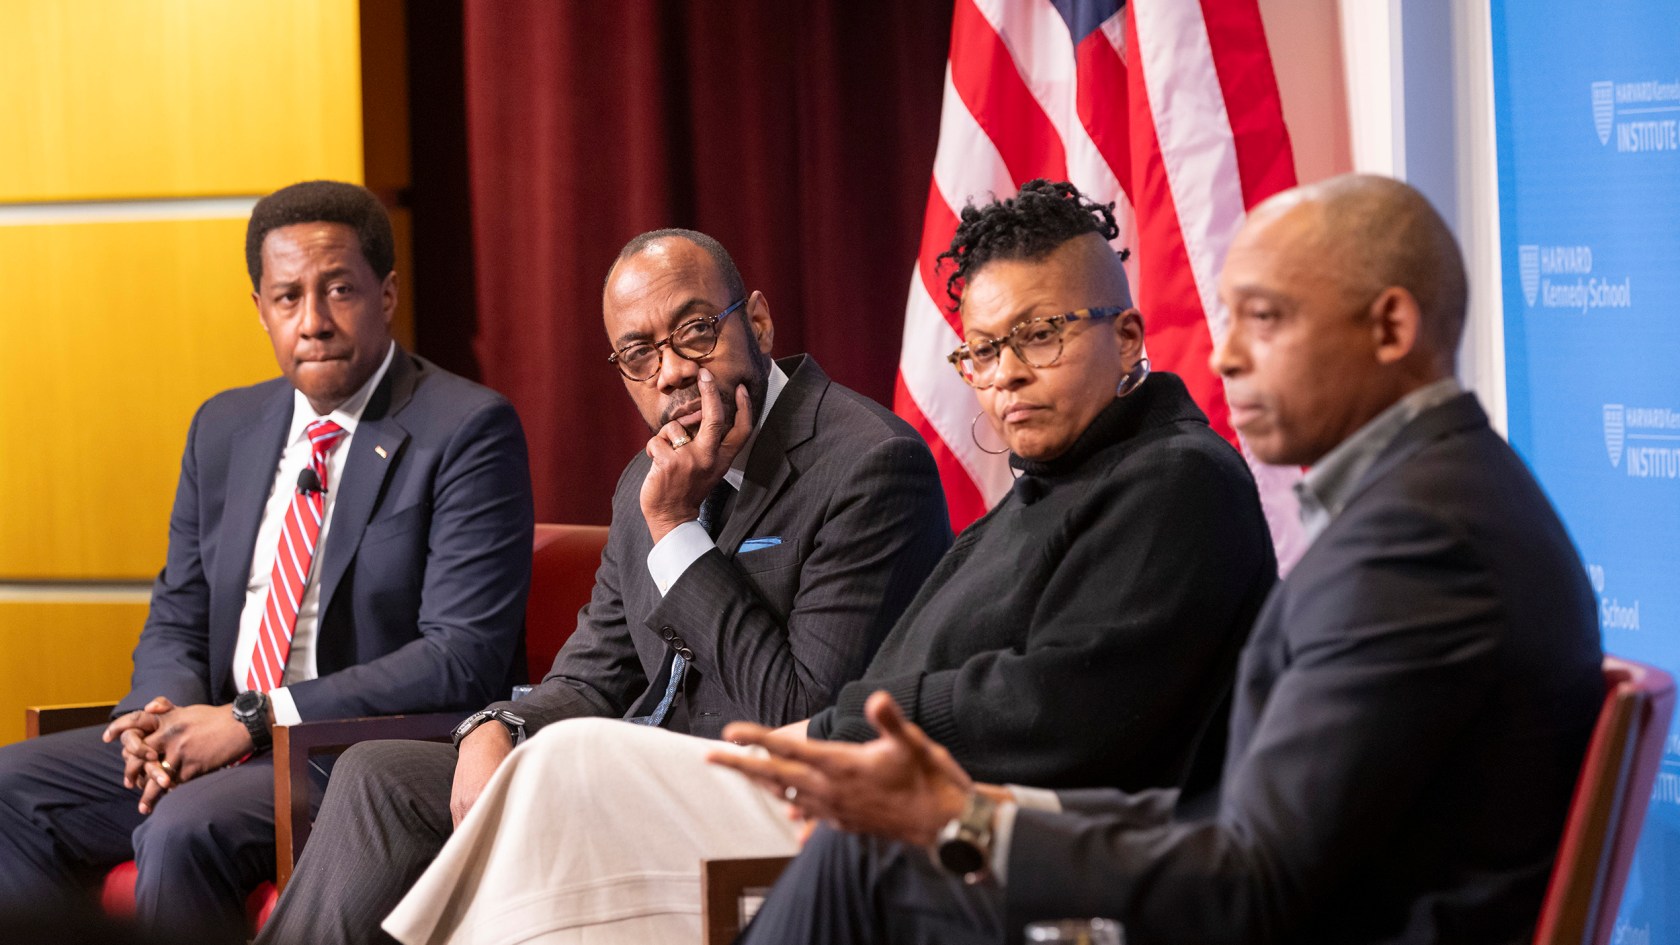 Setti Warren (from left), Cornell William Brooks, Sandra Susan Smith, and Khalil Gibran Muhammad speaking during the event.